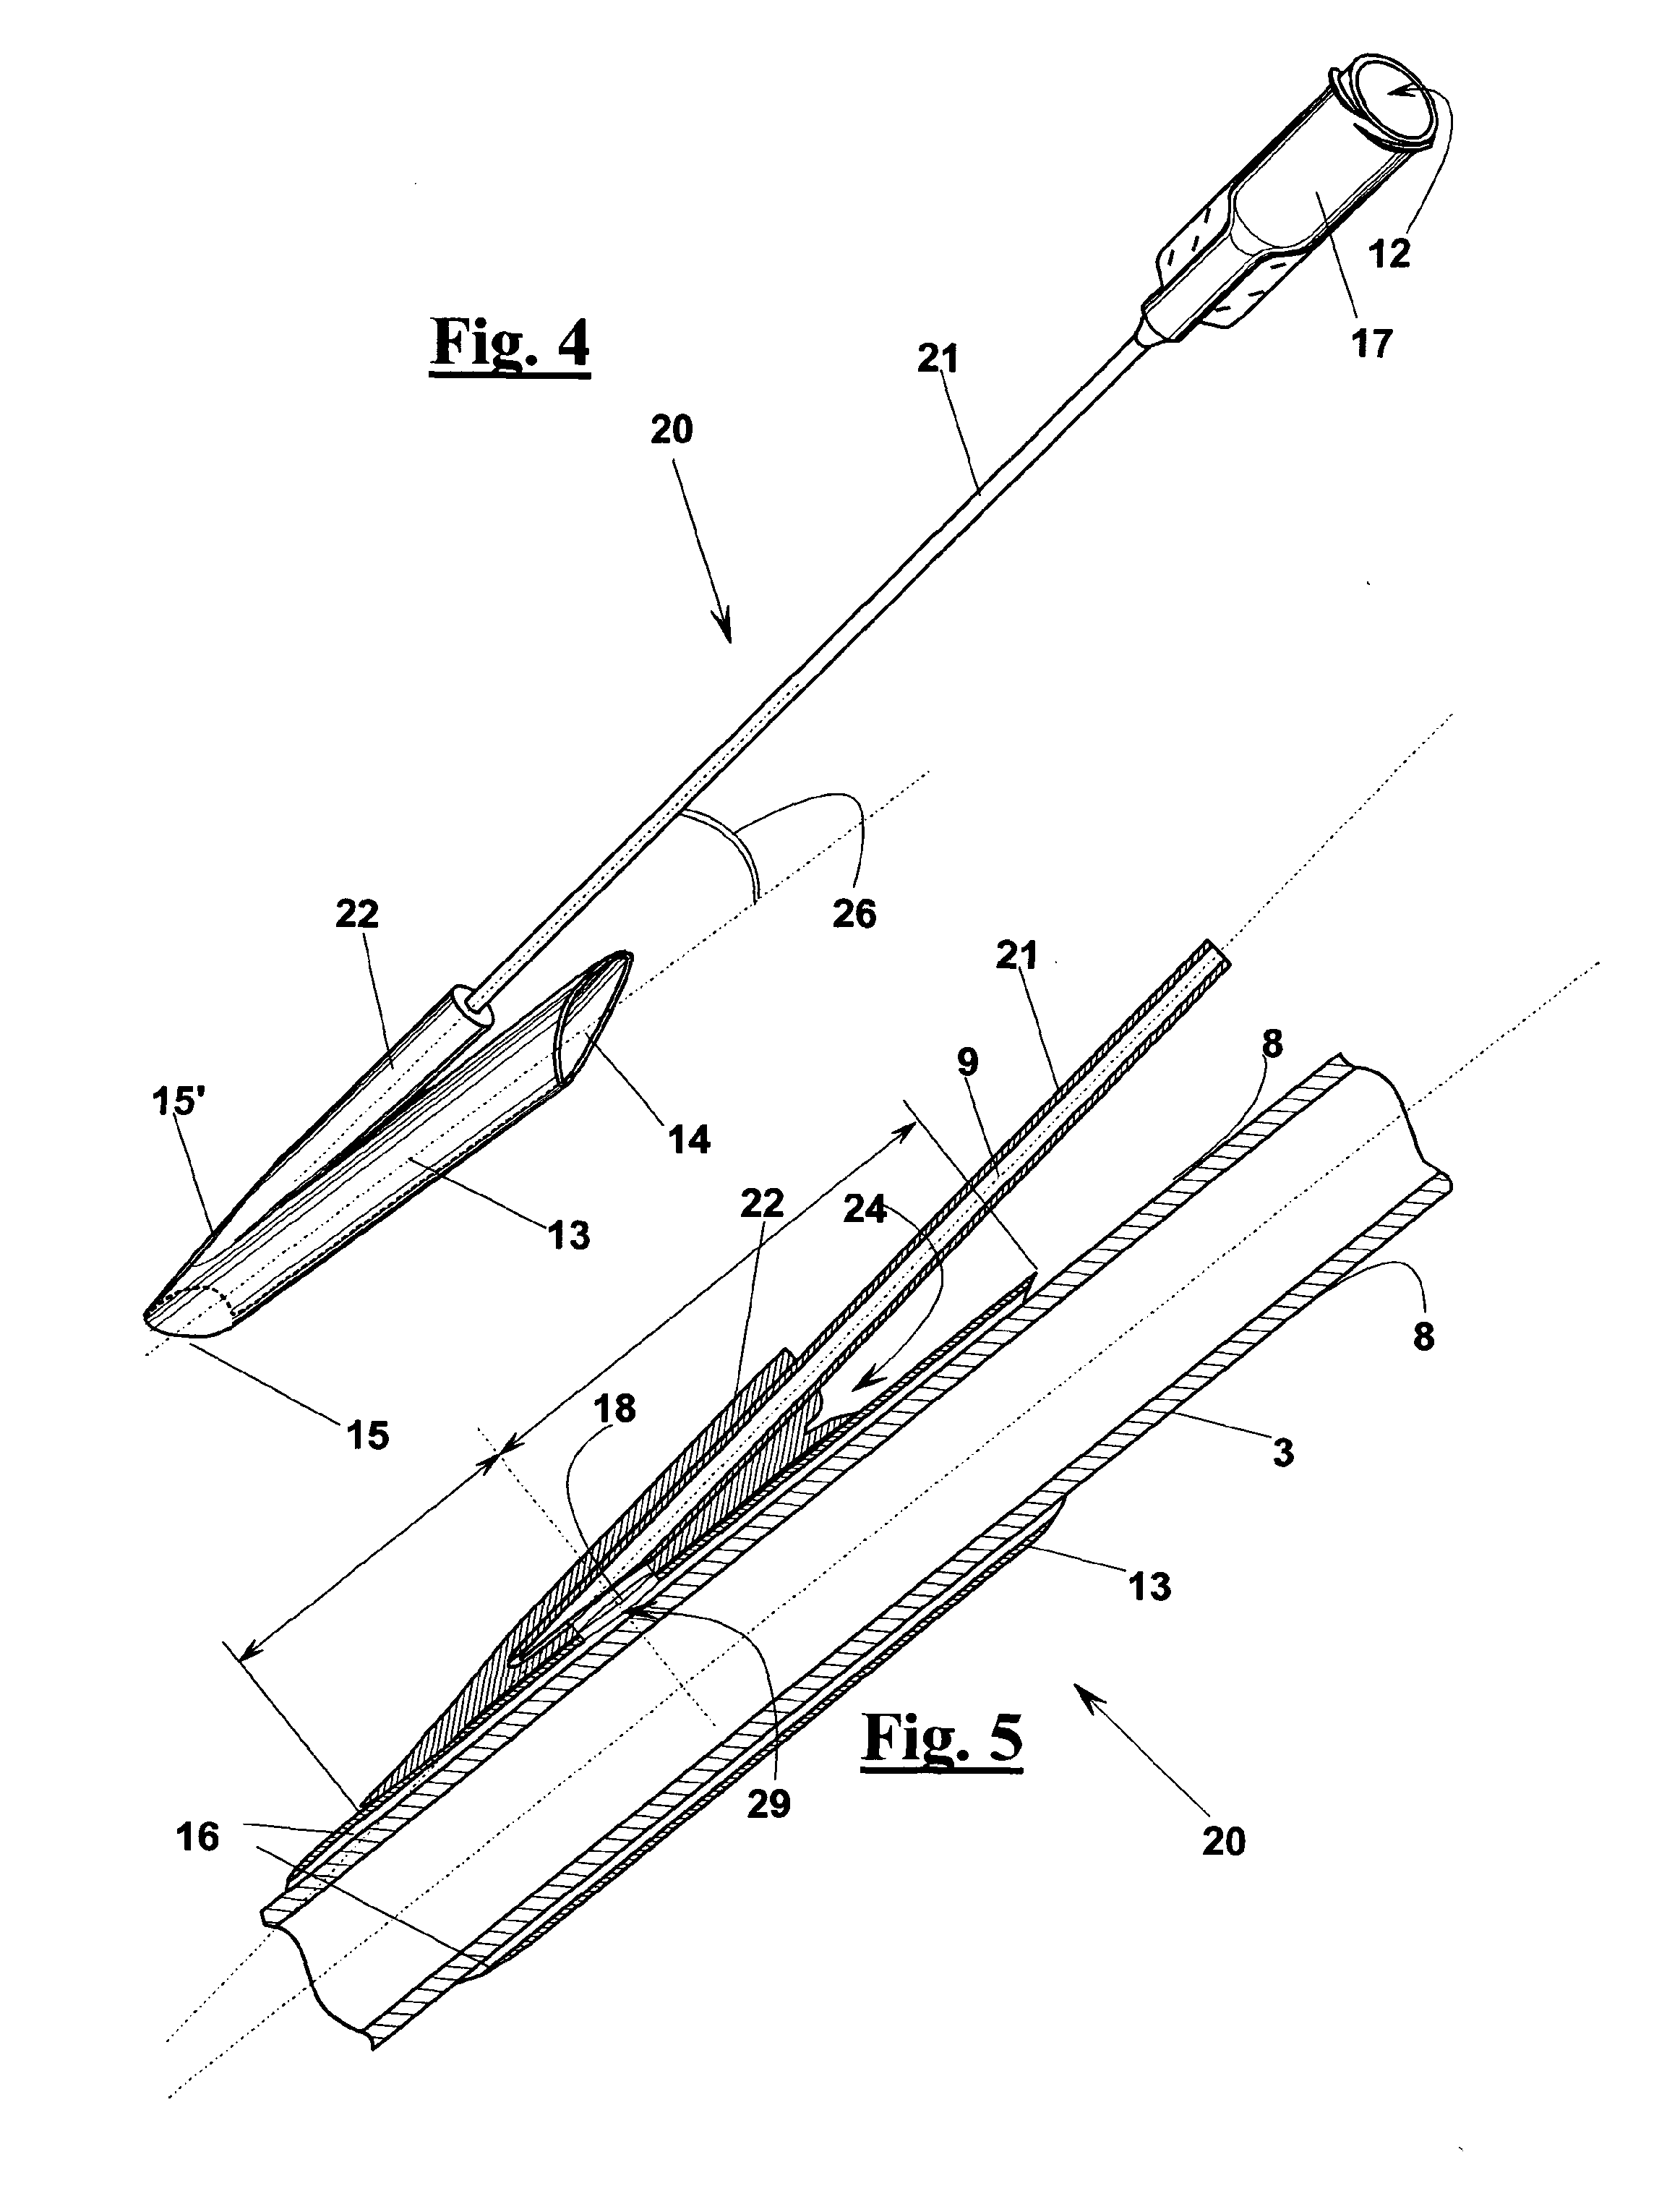 Occlusion device for vascular surgery